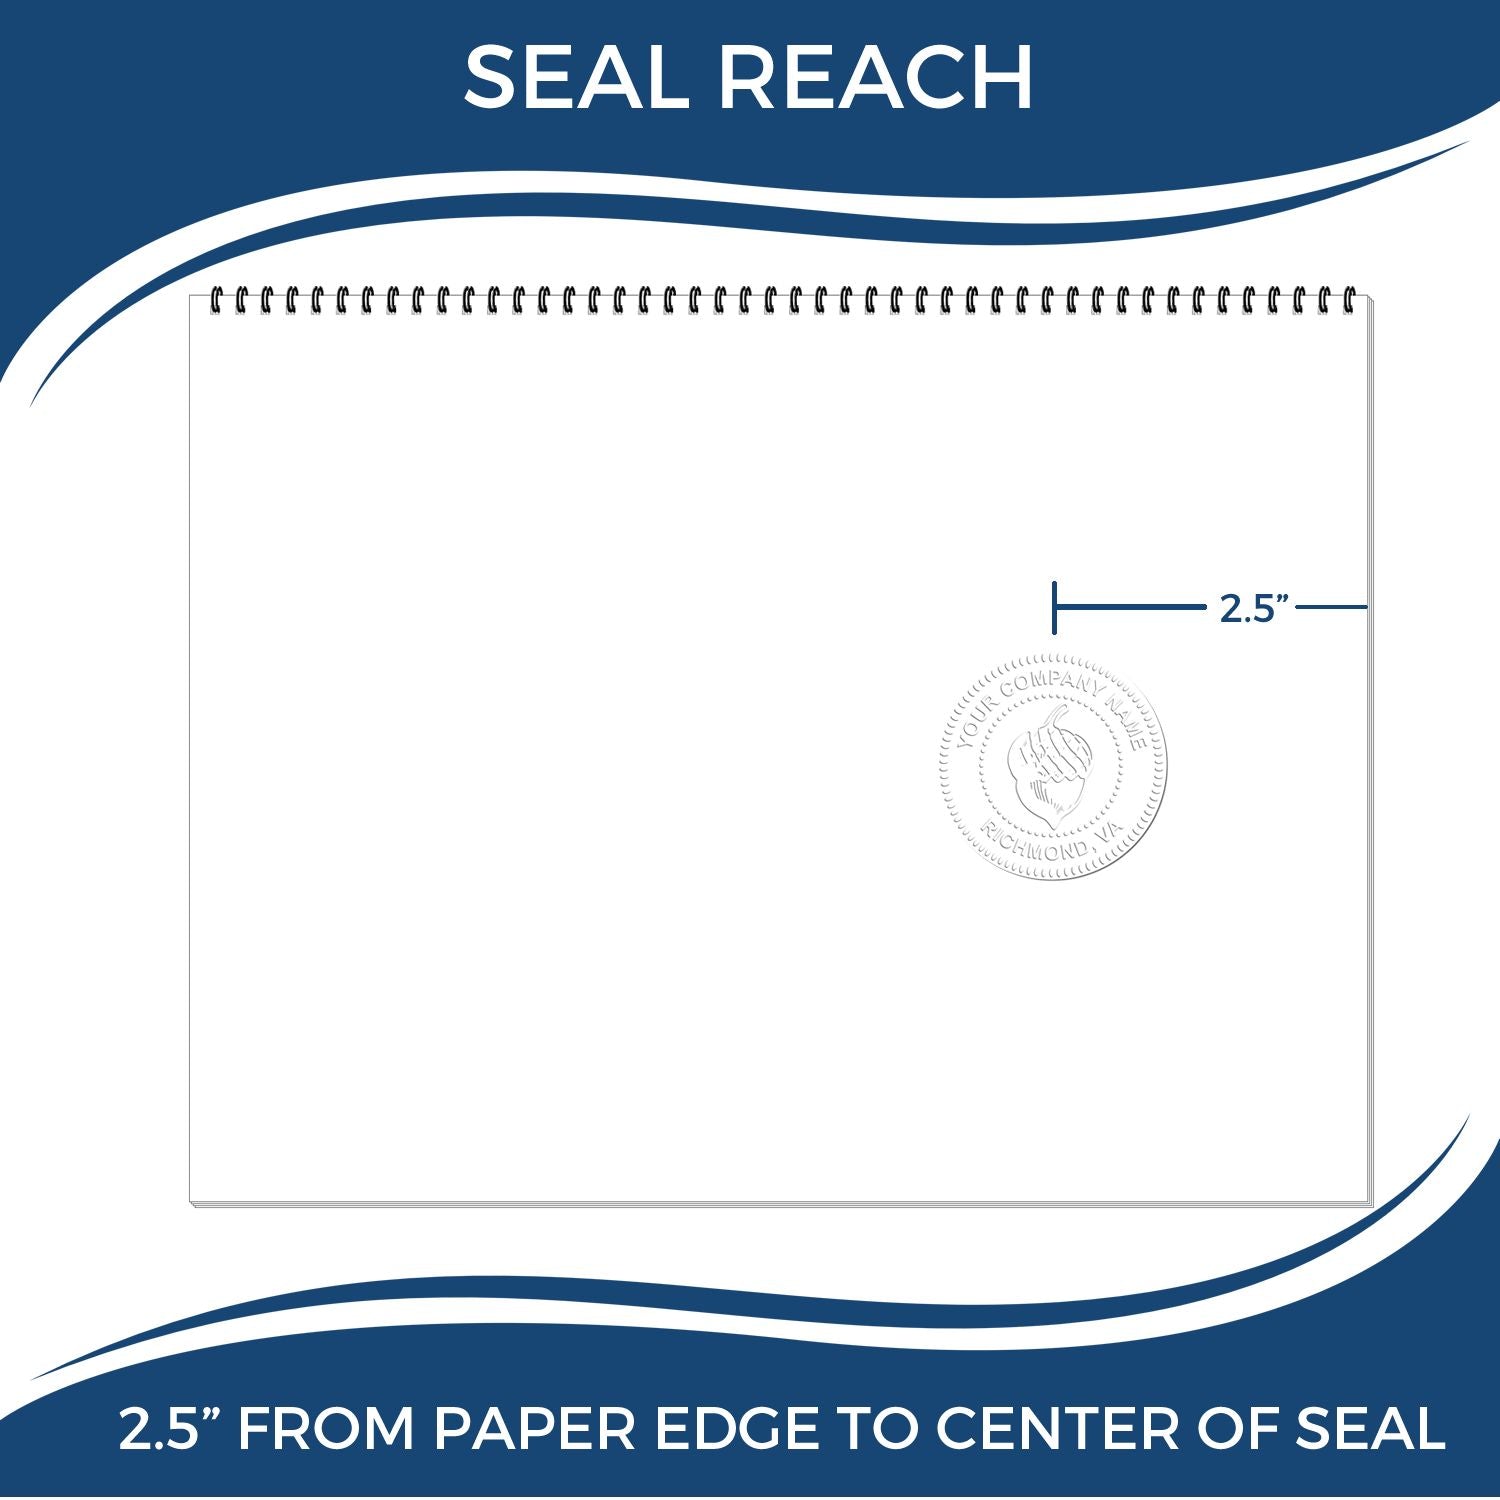 An infographic showing the seal reach which is represented by a ruler and a miniature seal image of the Heavy Duty Cast Iron Arkansas Engineer Seal Embosser